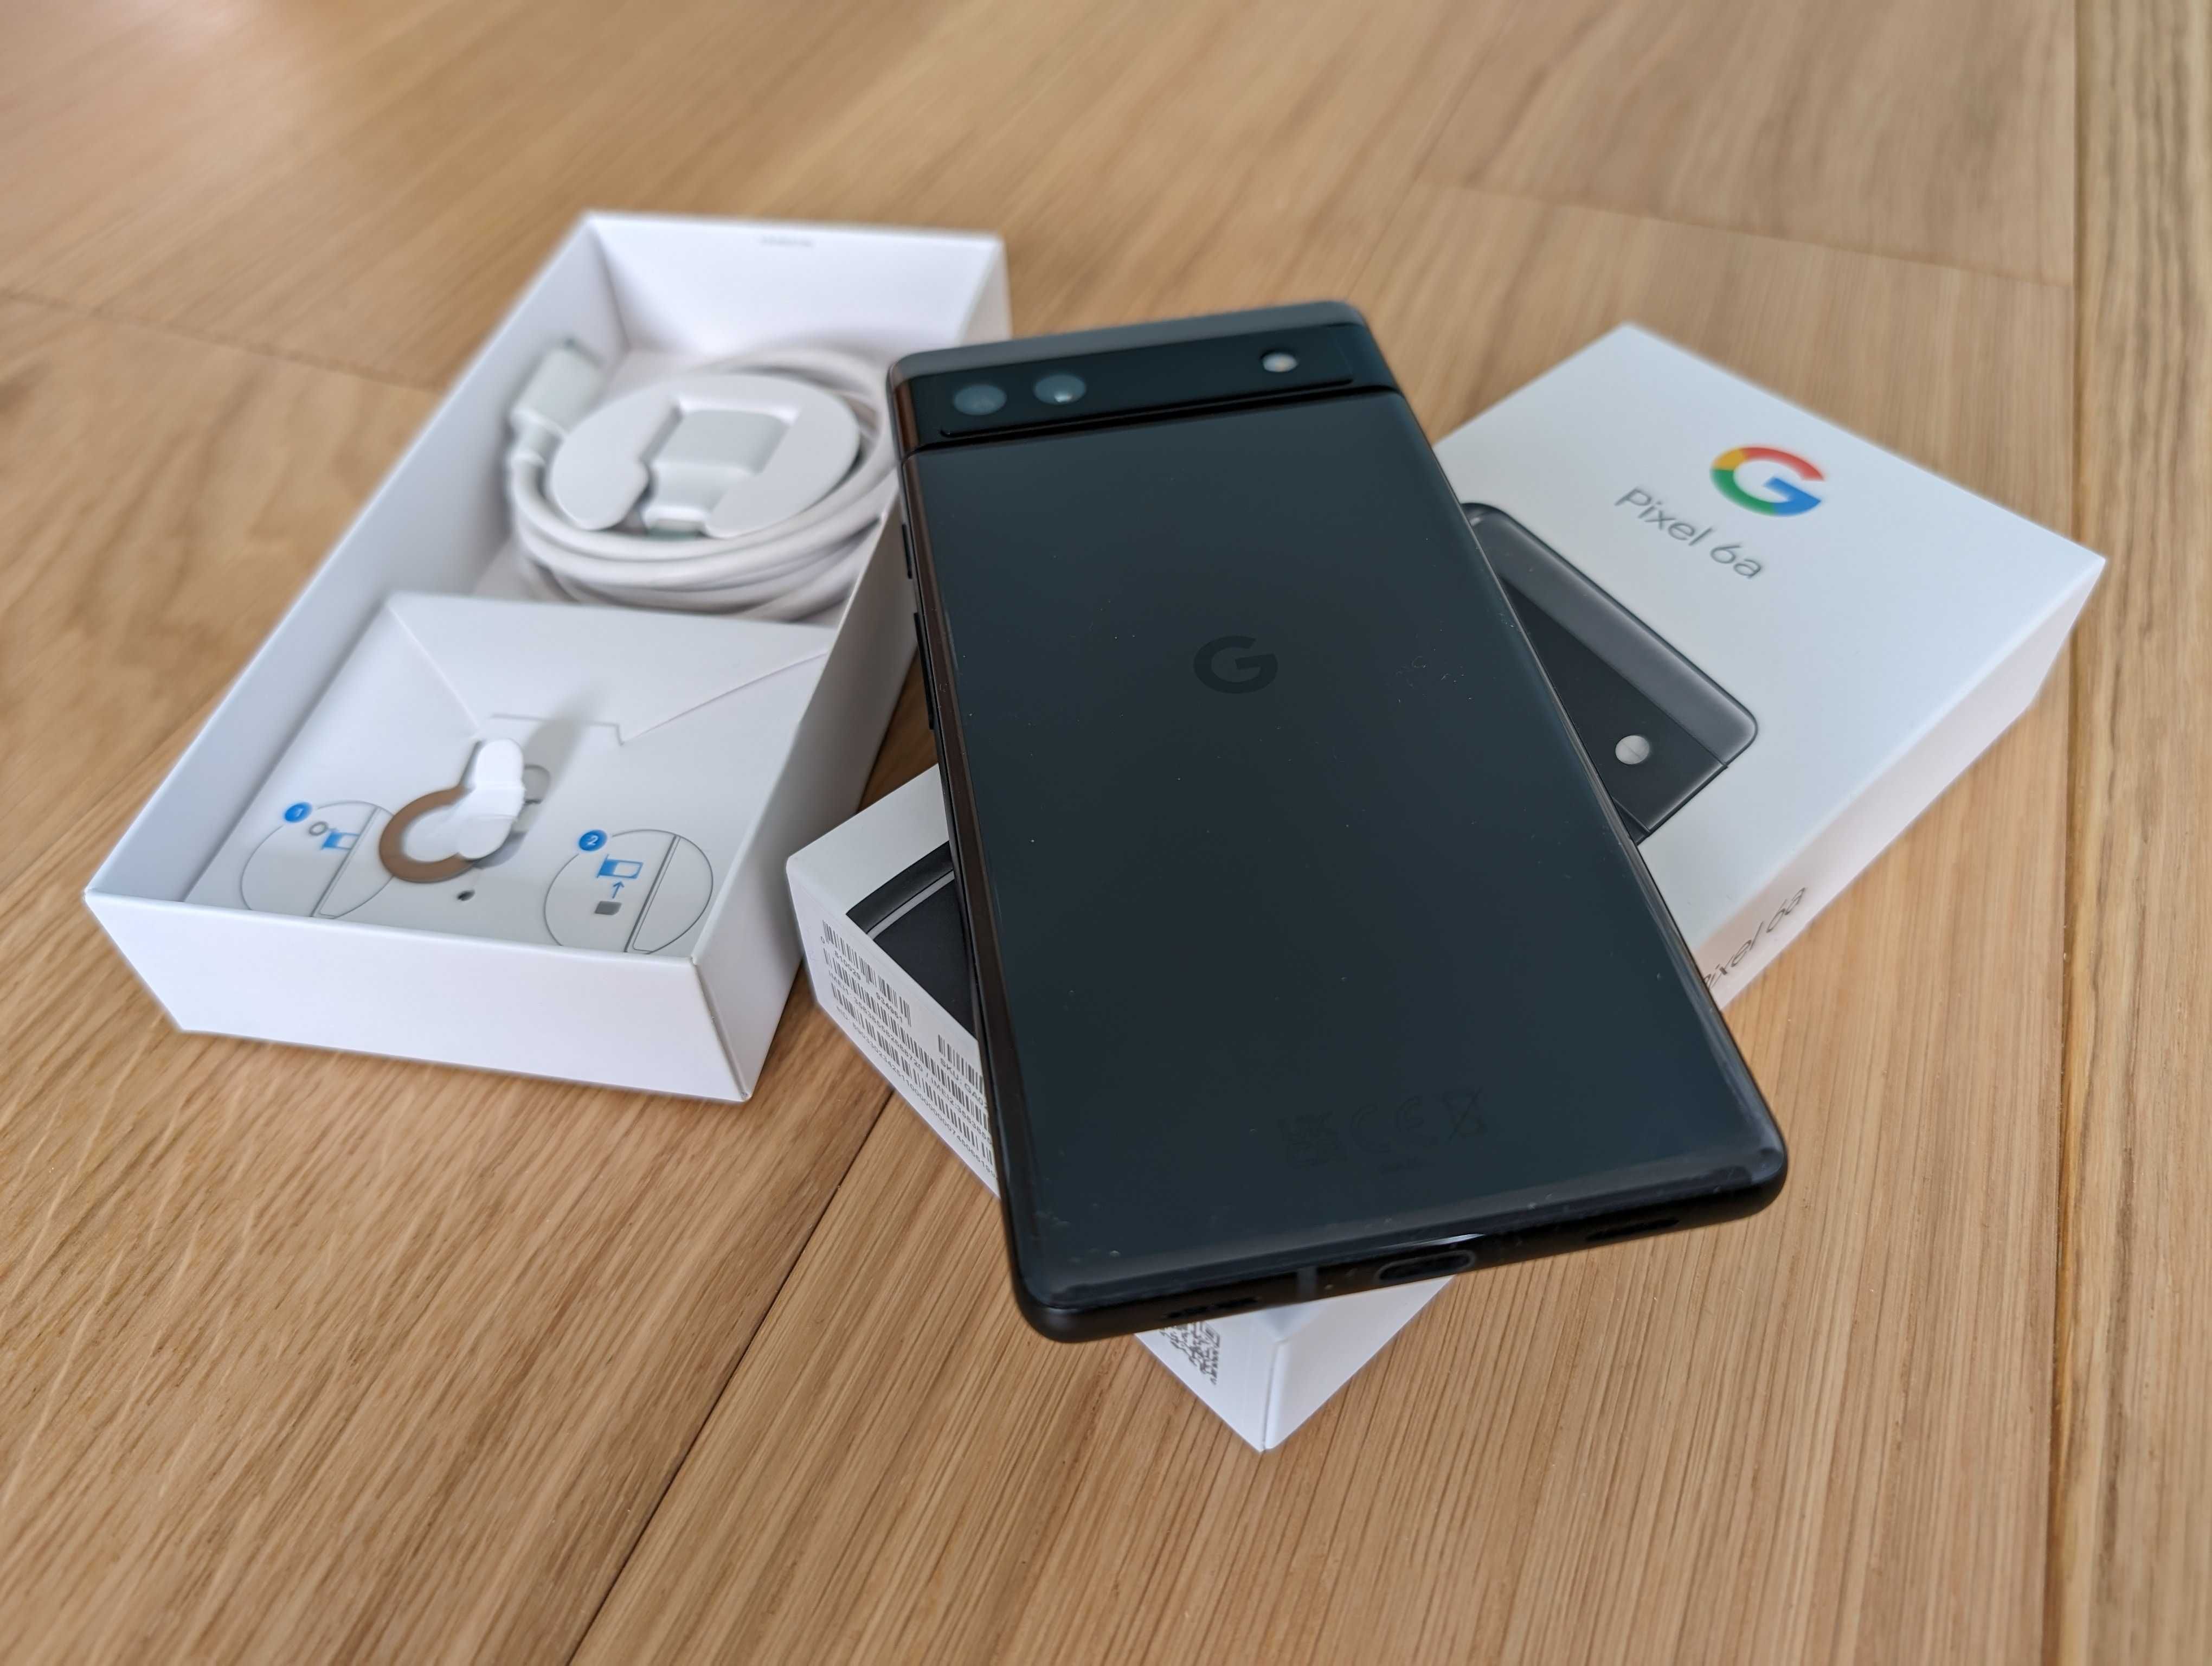 Google Pixel 6a - Unlocked Android 5G Smartphone - Charcoal